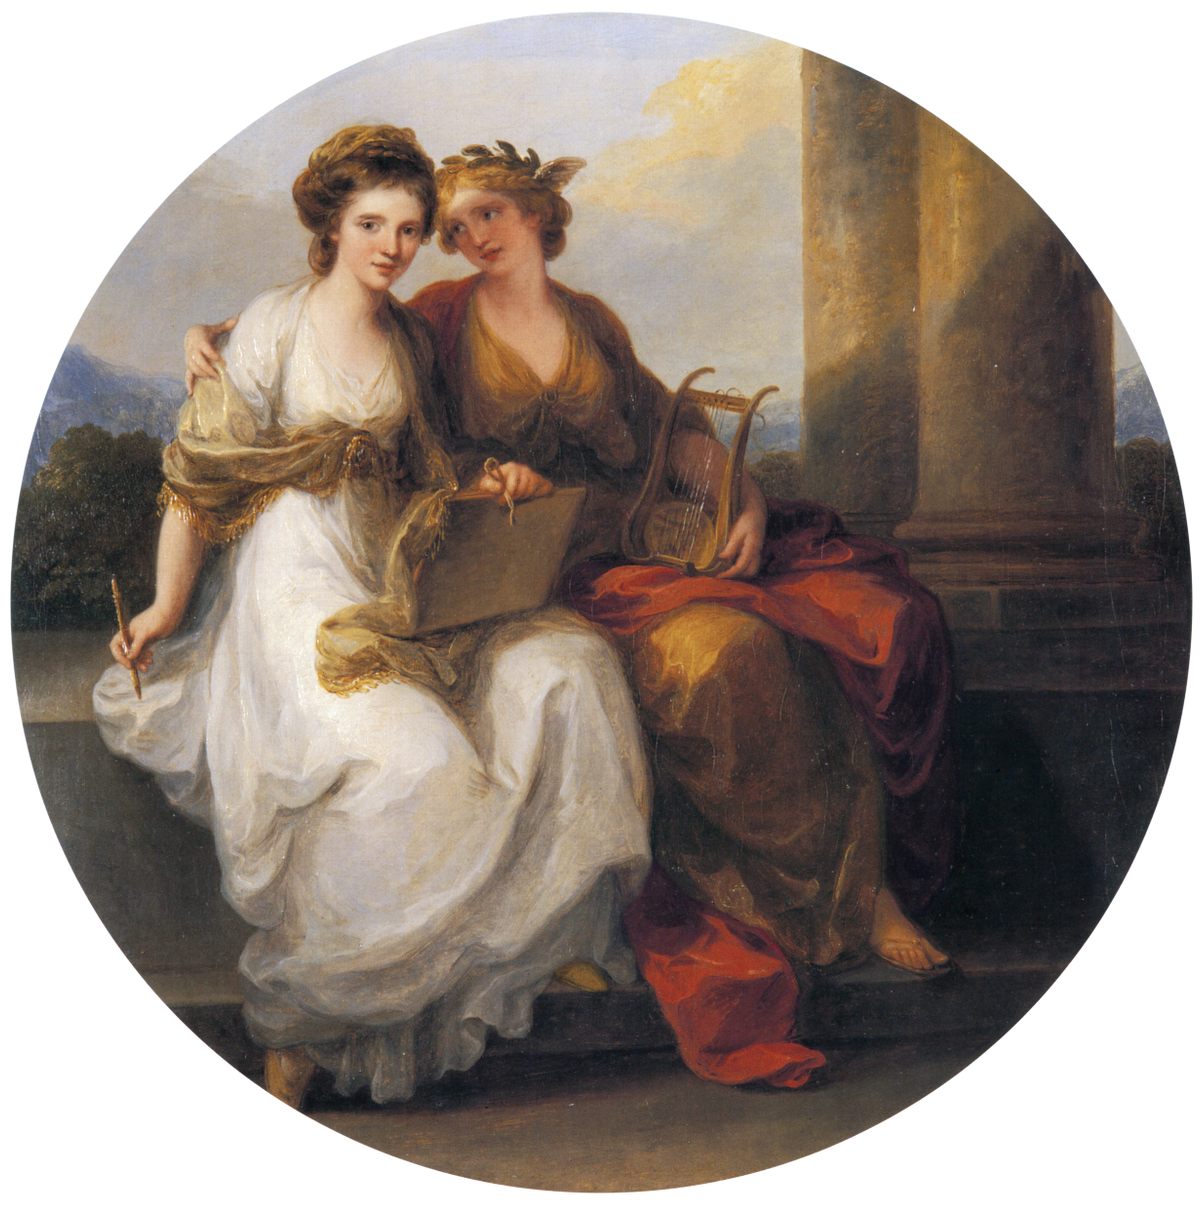 Throughout history, romantic poetry has celebrated familial relationships, friendships, religious faith, and other human connections.